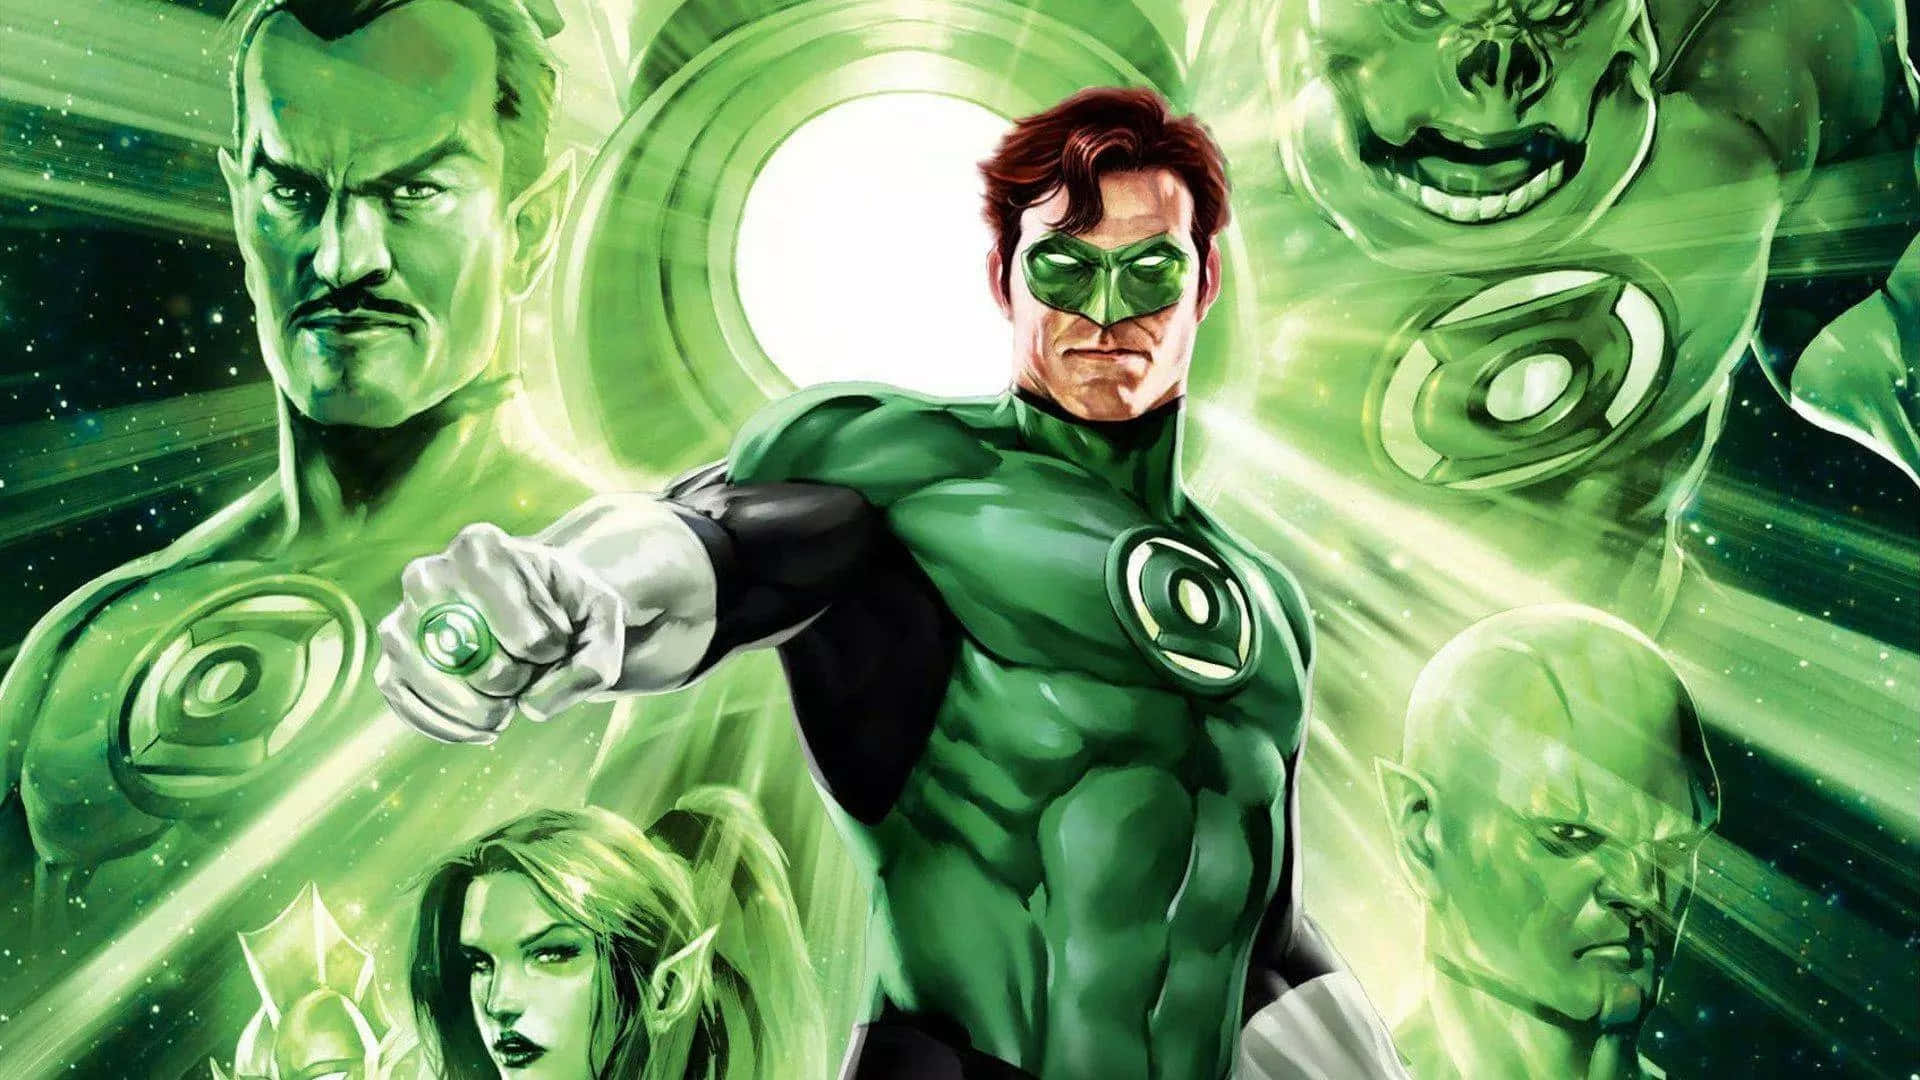 Download Harnessing the power of the Green Lantern Corps | Wallpapers.com